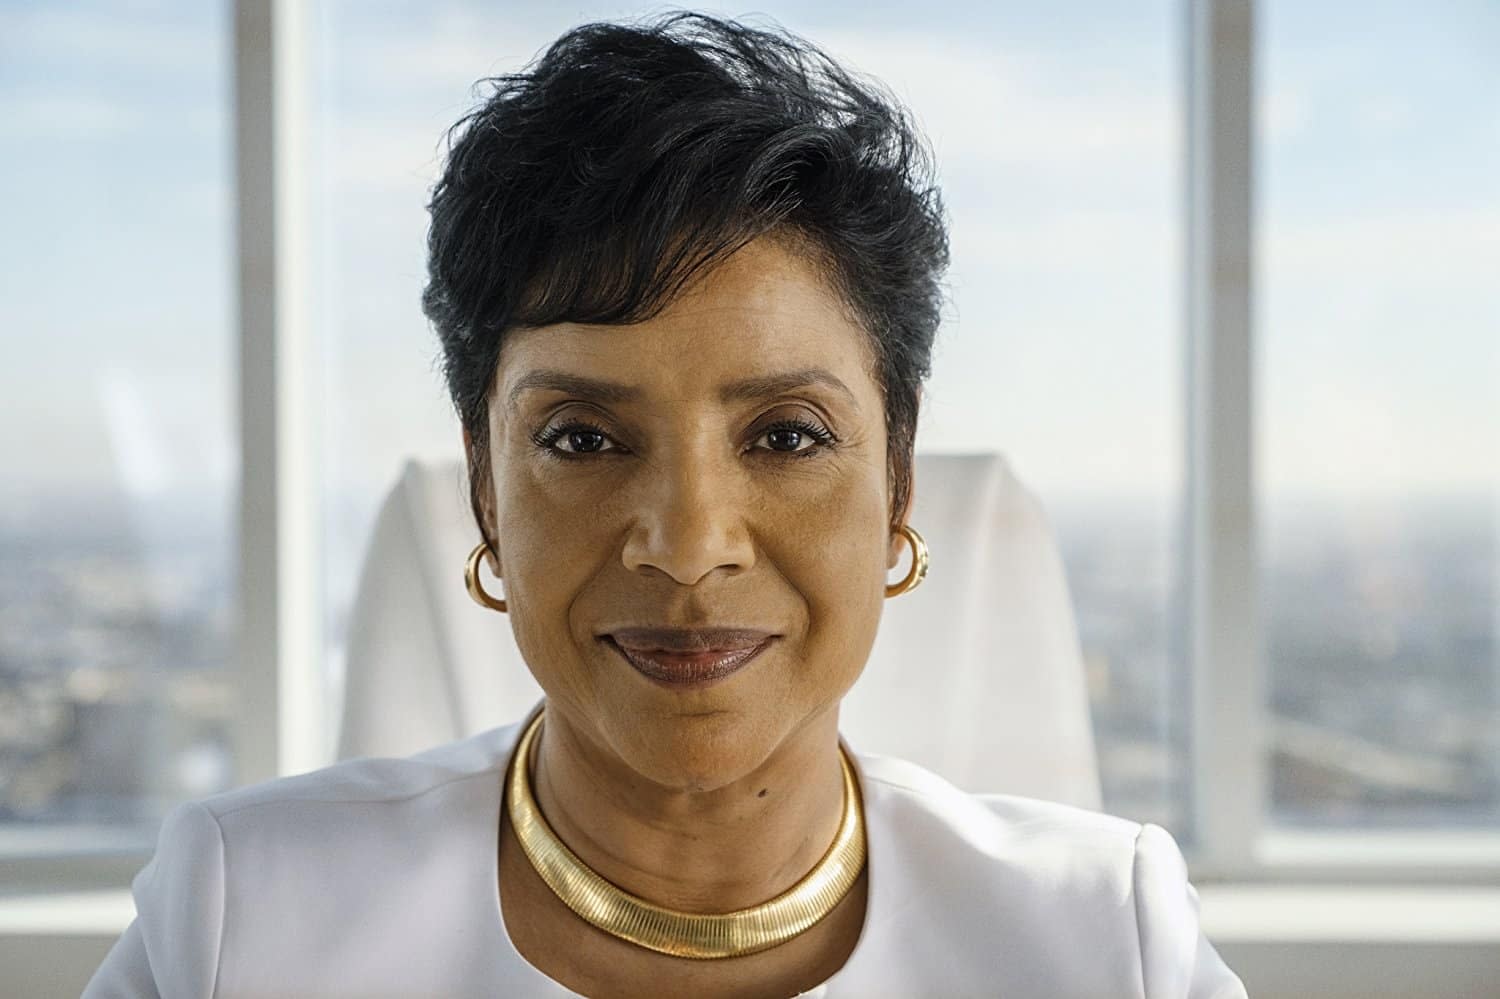 This Is Us Season 3: The Cosby Show's Phylicia Rashad Cast as Beth's Mom